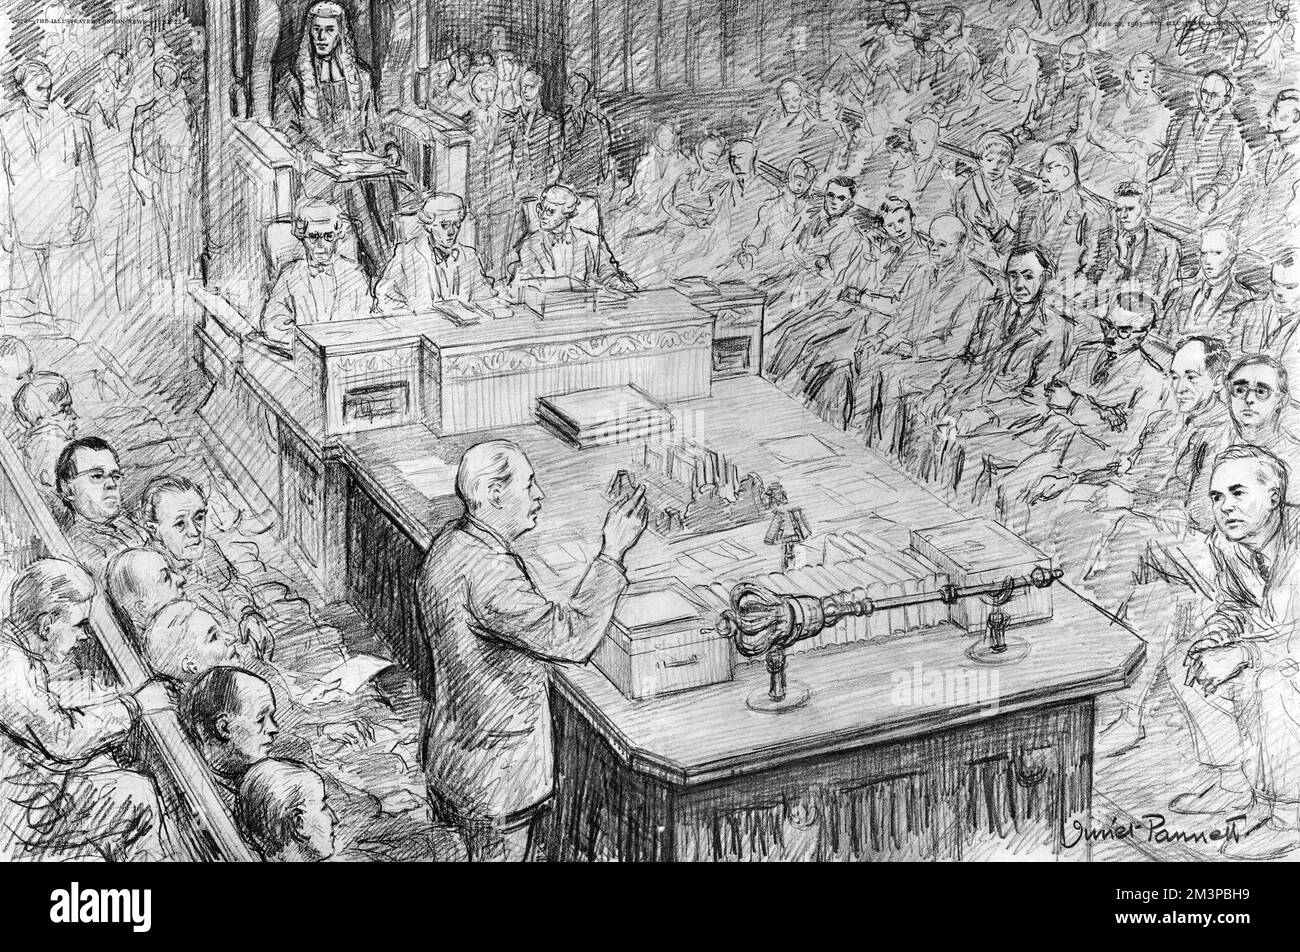 'We have not been parties to deception.' Artist's impression by Juliet Pannett, special artist for the ILN, showing Prime Minister Harold Macmillan, speaking in the House of Commons during the debate on the Profumo scandal on 17 June 1963.  John Profumo, Minister for War, resigned the next day after admitting he had lied to the House earlier that year in March regarding his affair with Christine Keeler, who was also believed to be having a simultaneous liaison with the Russian Naval Attache in London, Yevgeny Ivanov.      Date: 1963 Stock Photo